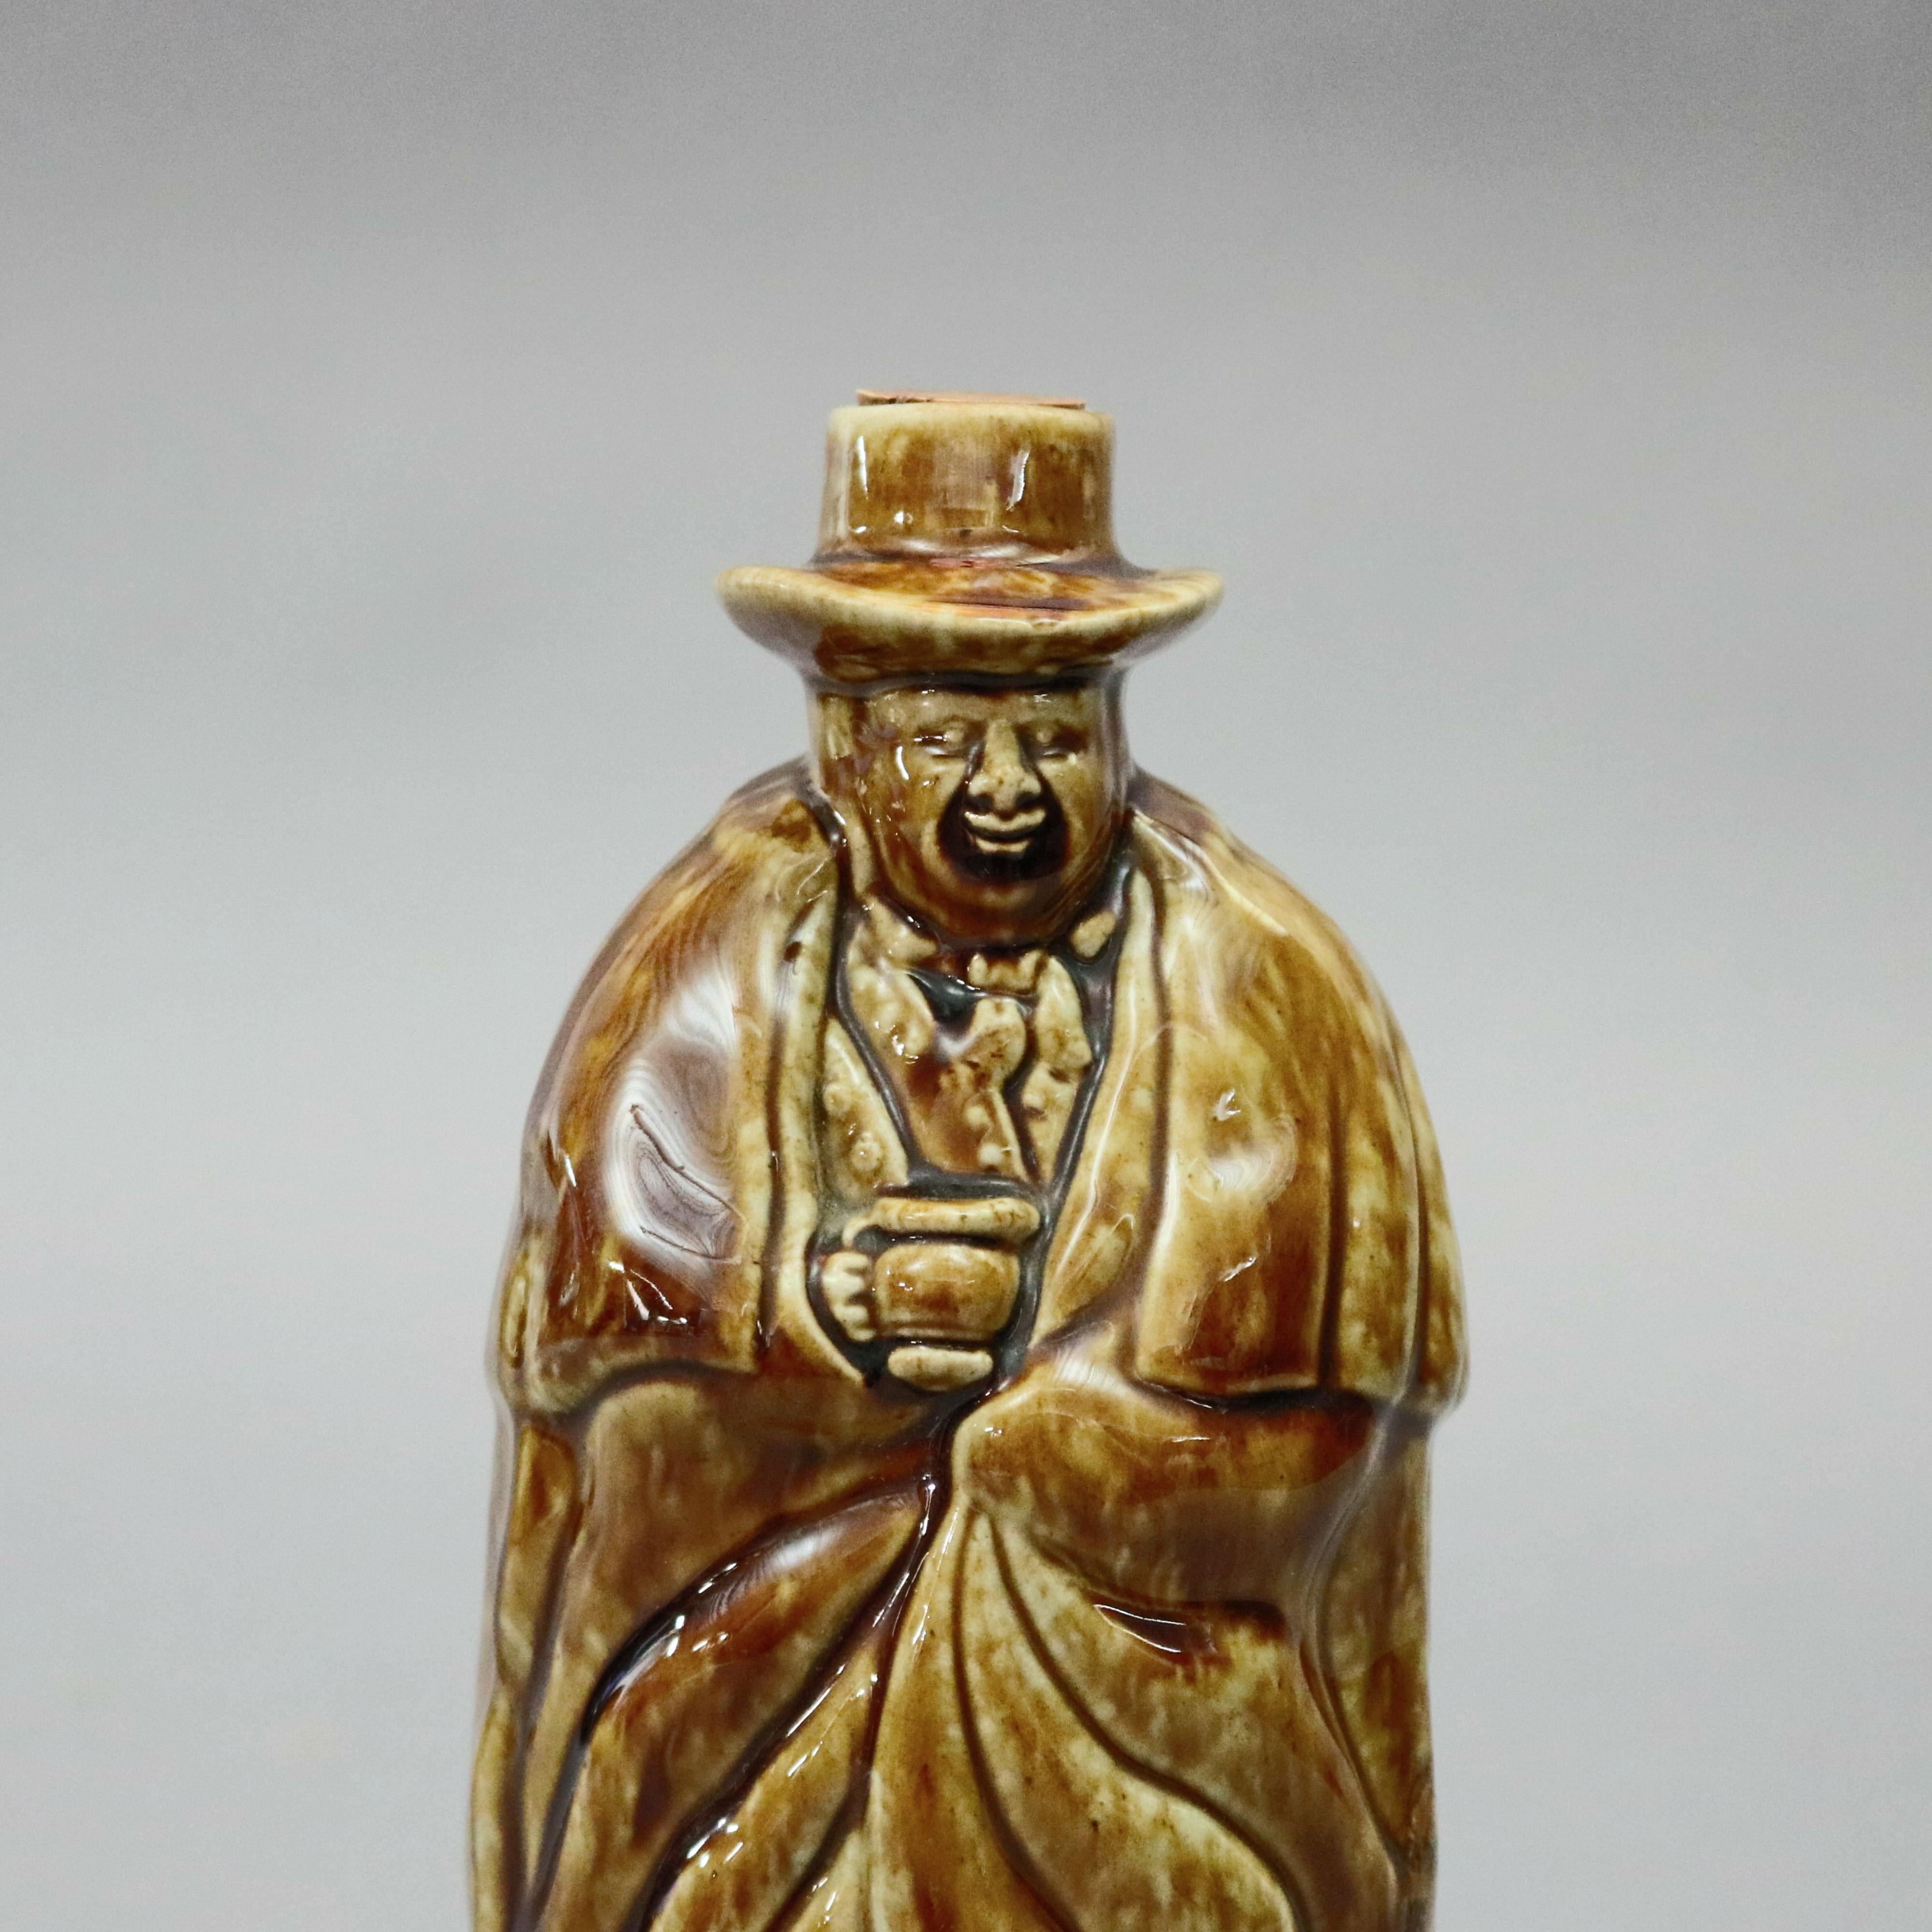 An antique Bennington Pottery figural whiskey flask offers coachman form in Rockingham glaze, maker stamp on base as photographed, circa 1849

Measures - 10